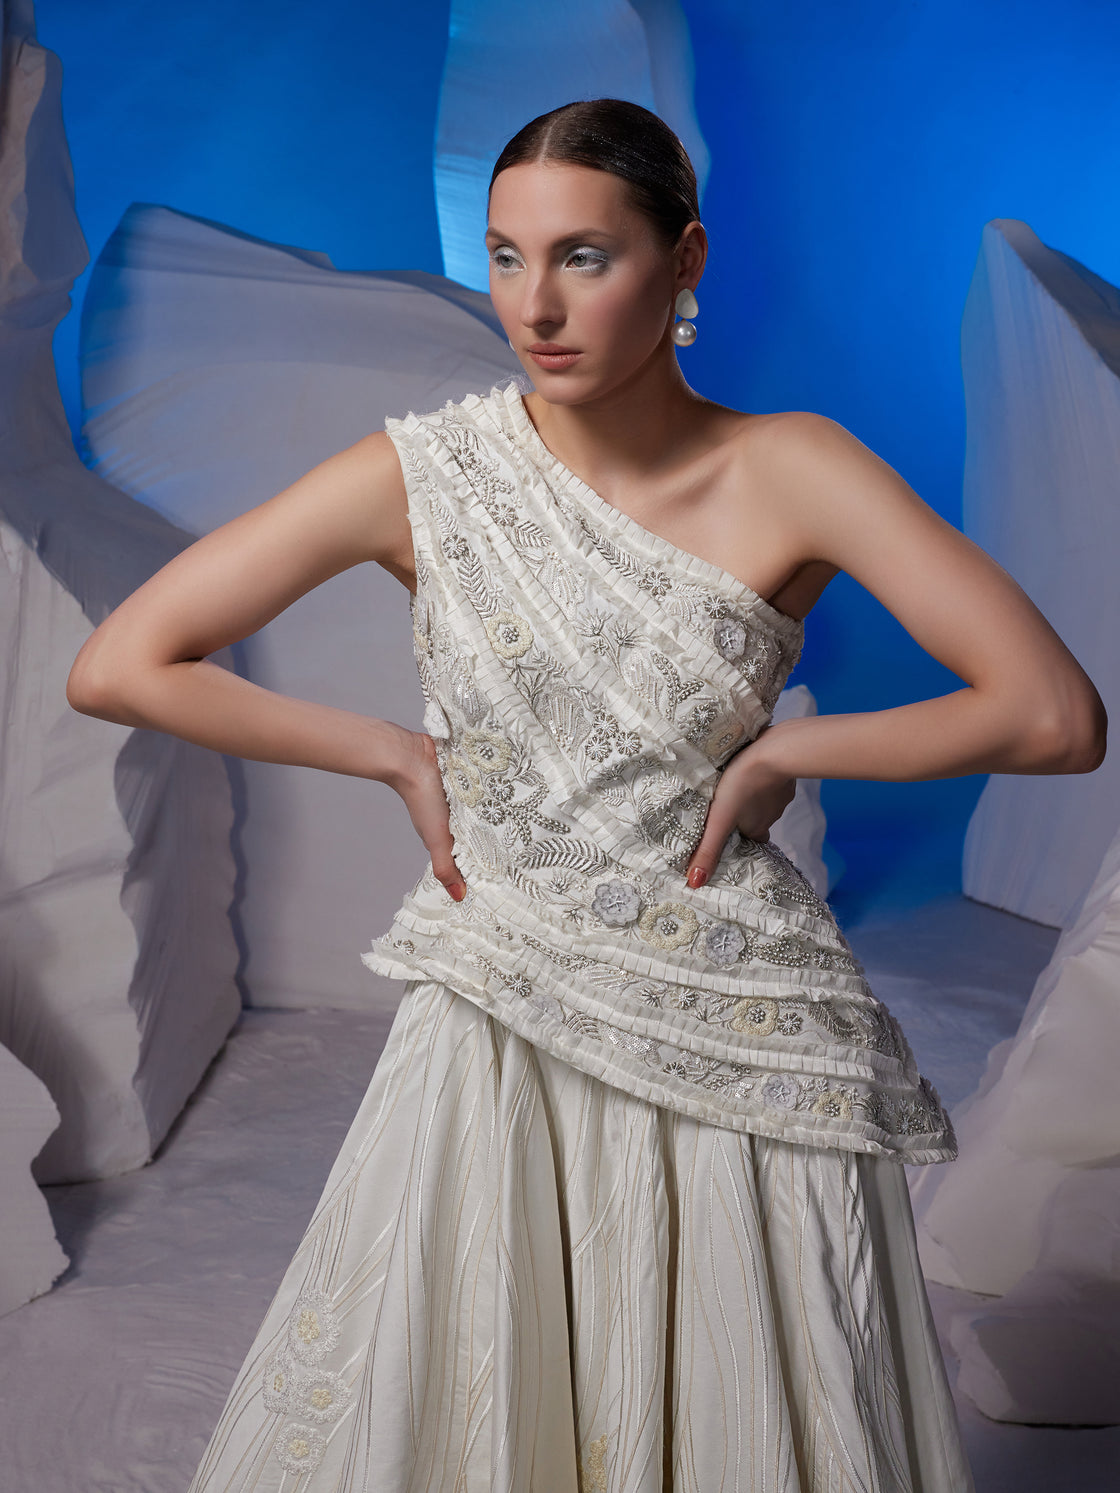 One-shoulder gown textured with frills